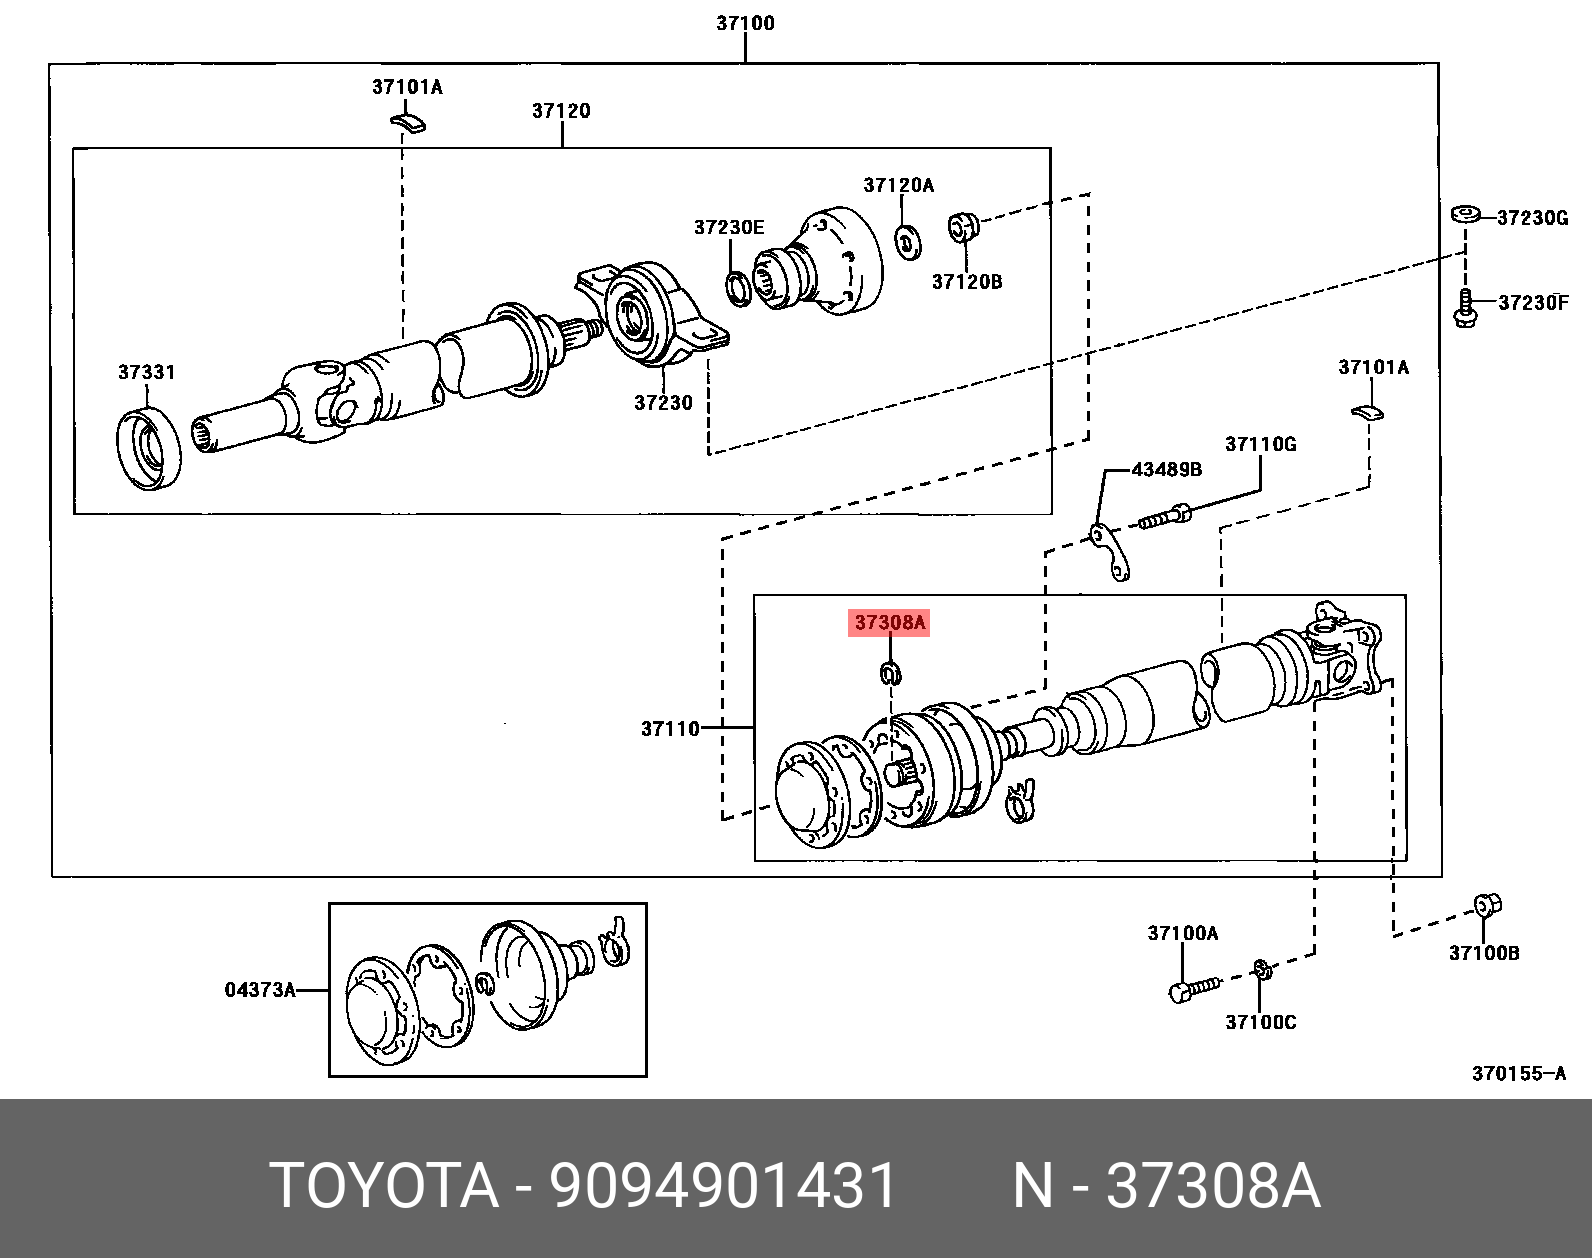 CALDINA 199708 - 200209, CLAMP (FOR UNIVERSAL JOINT COVER)